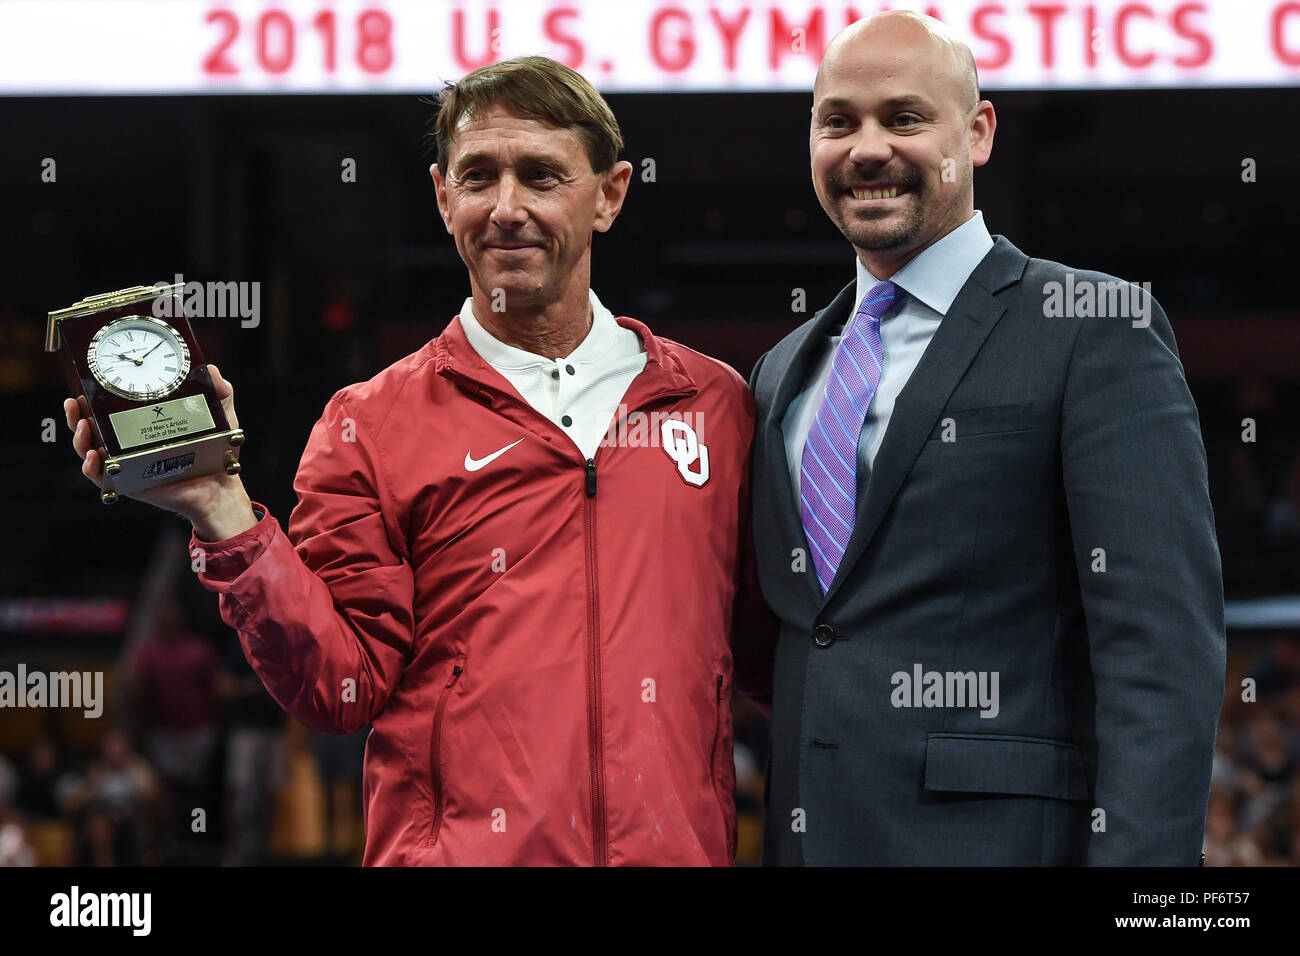 Boston, Massachussetts, USA. 18th Aug, 2018. BRETT MCCLURE (right) poses with MARK WILLIAMS (left) for winning Coach of the Year following the competition held at TD Garden in Boston, Massachusetts. Credit: Amy Sanderson/ZUMA Wire/Alamy Live News Stock Photo